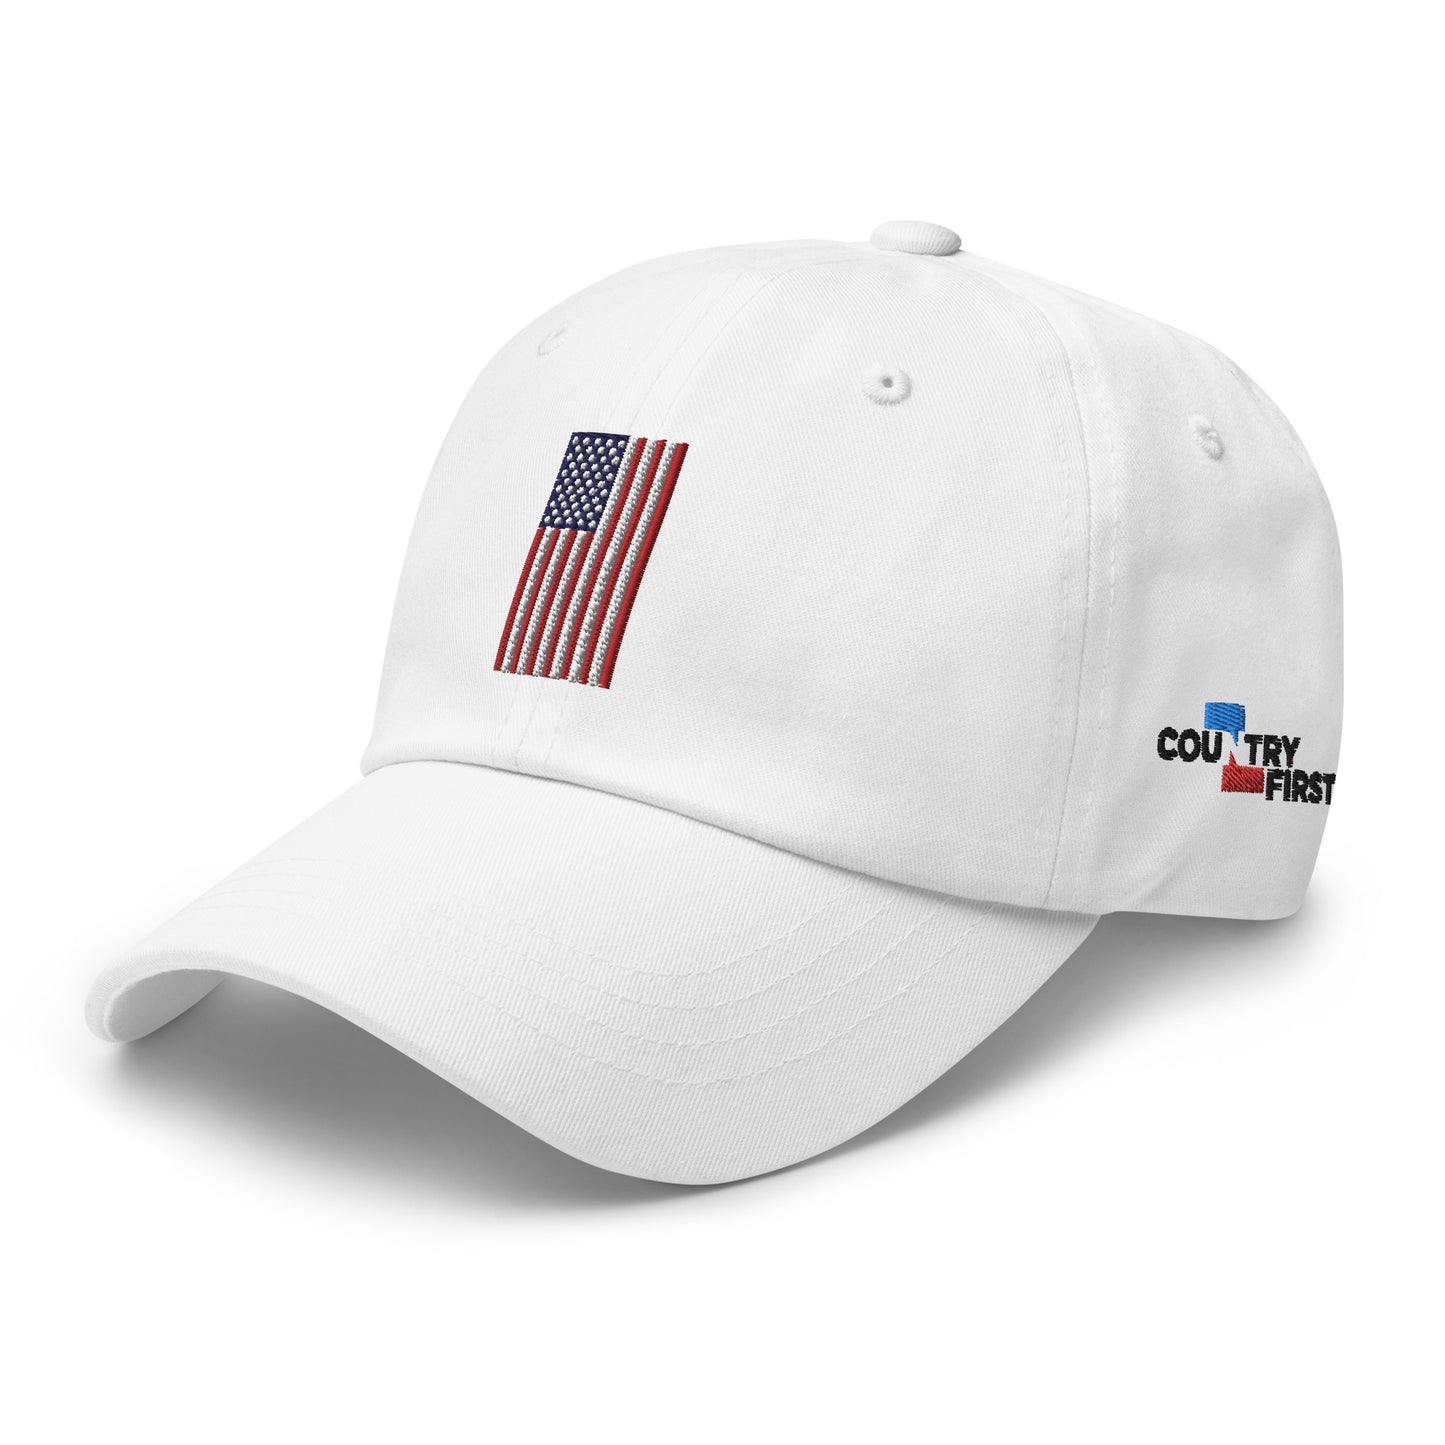 Stand For Truth Cap